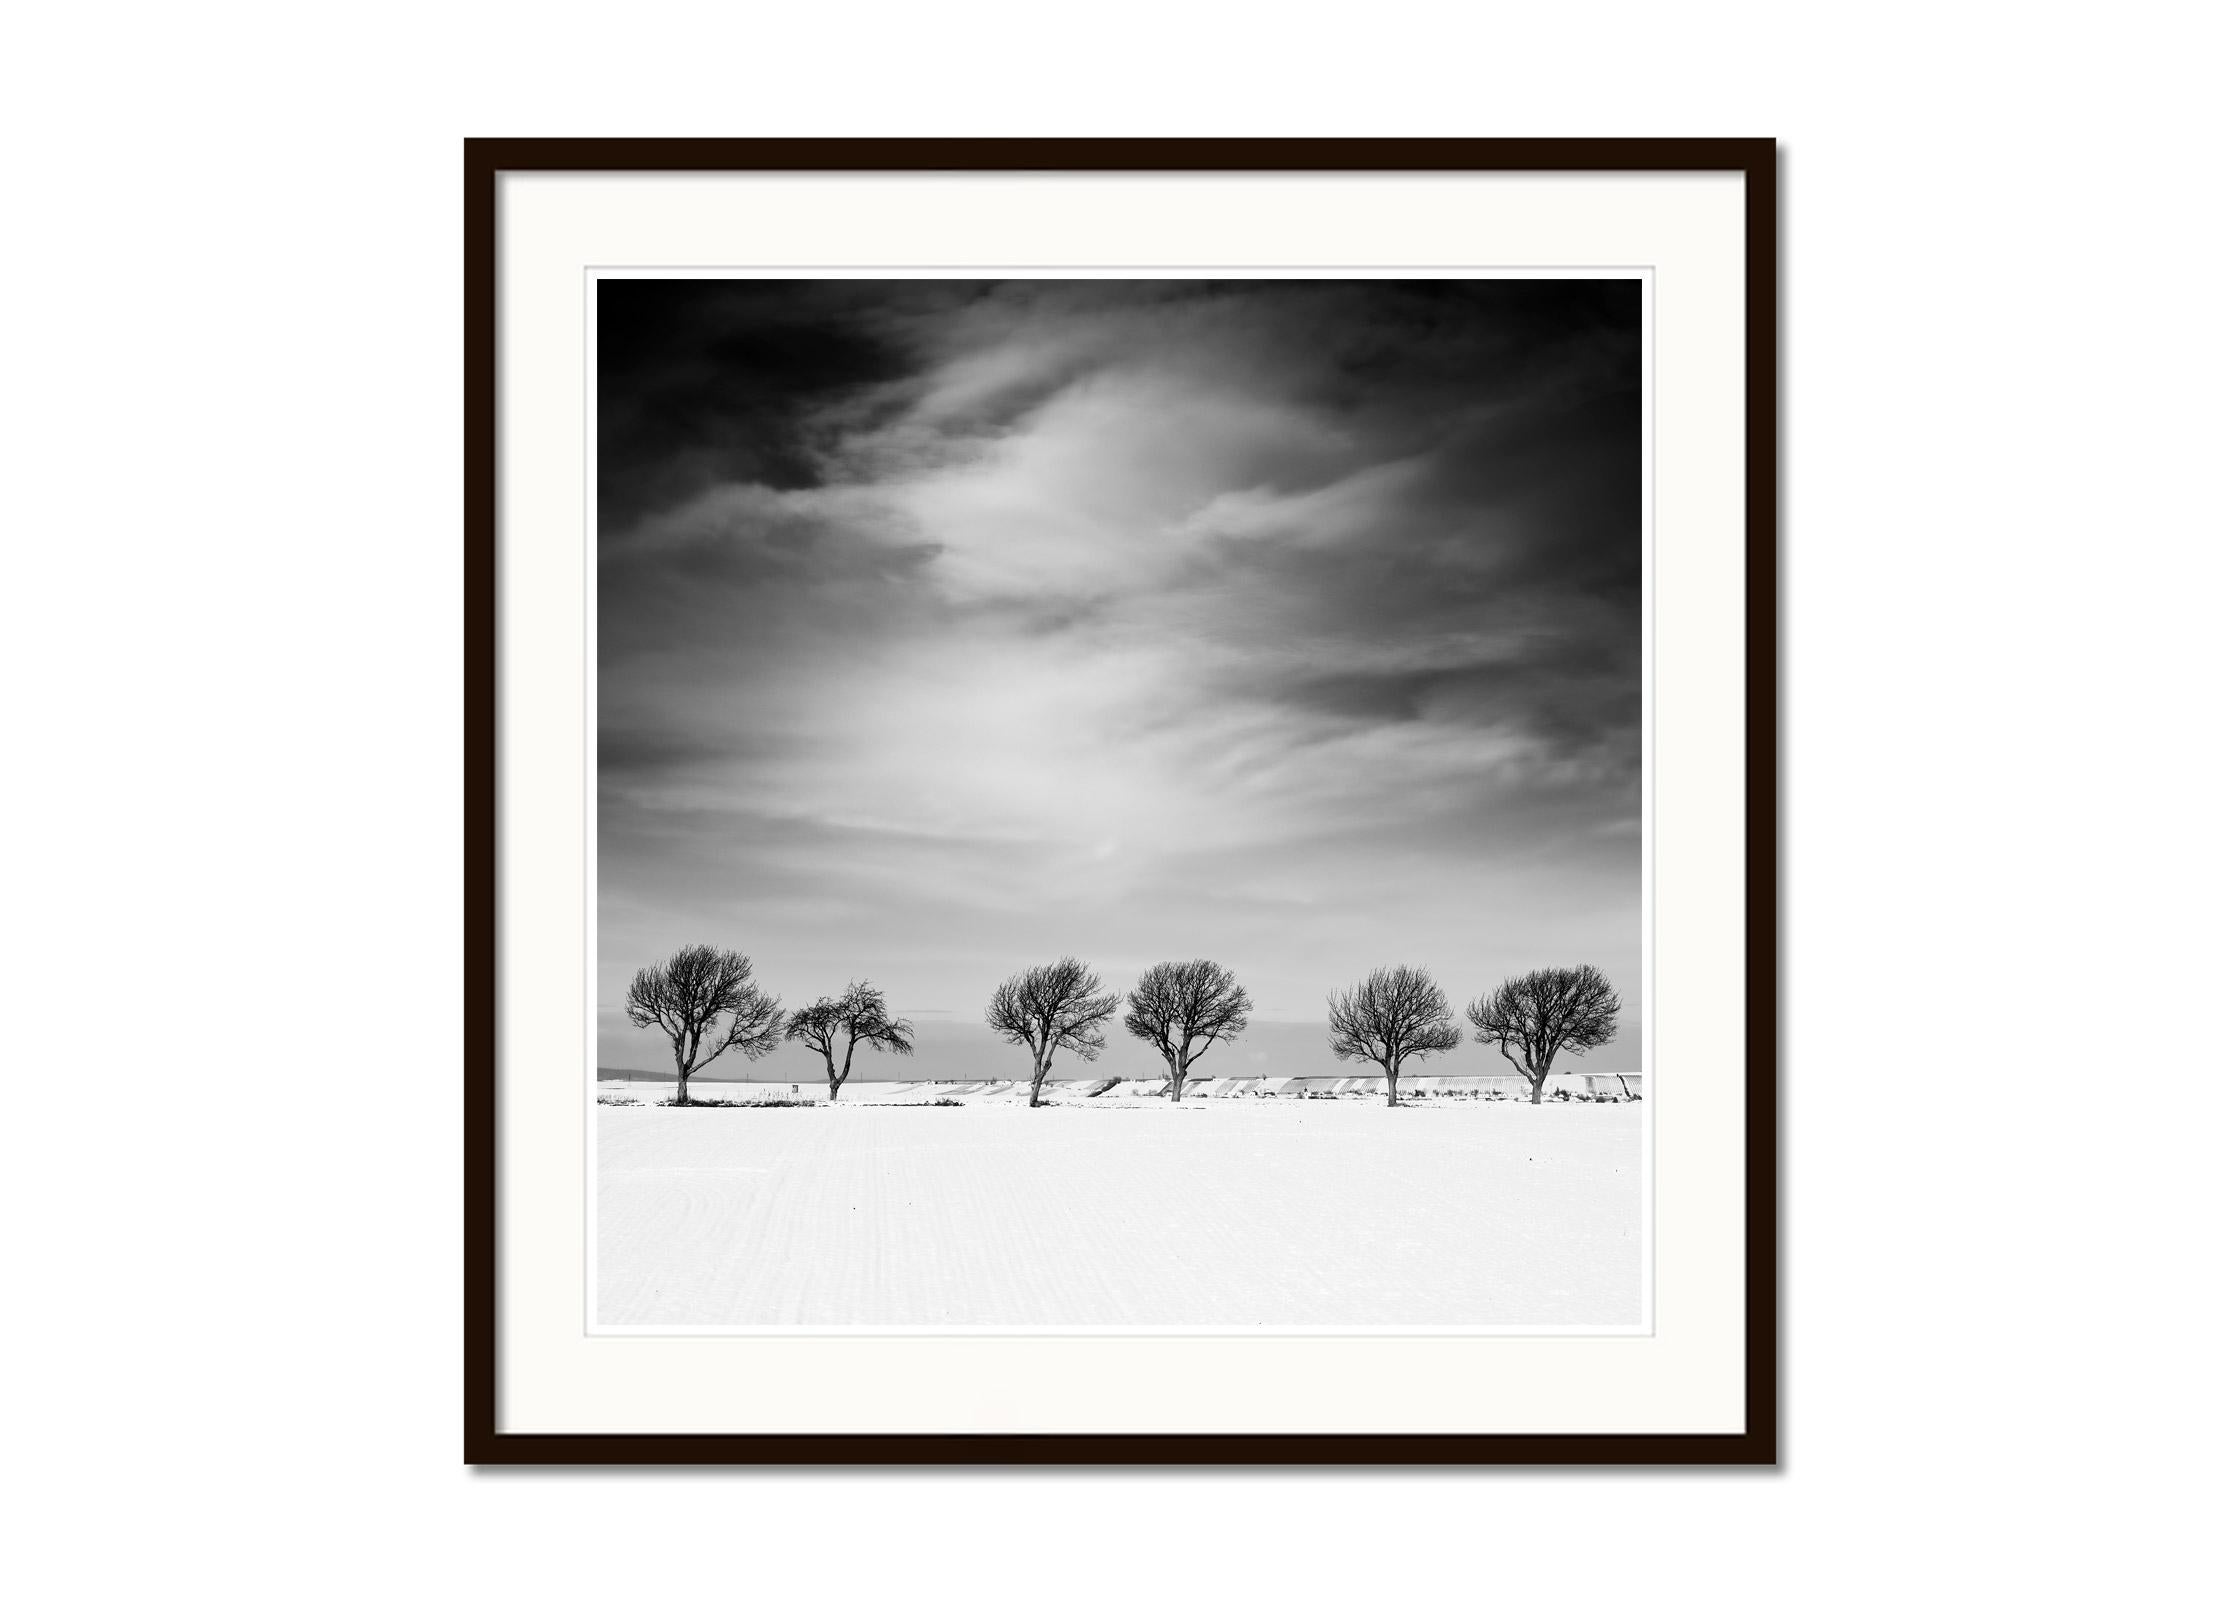 Black and white fine art landscape photography print. Cherry tree avenue on the edge of the snowy field in Austria. Archival pigment ink print, edition of 8. Signed, titled, dated and numbered by artist. Certificate of authenticity included. Printed